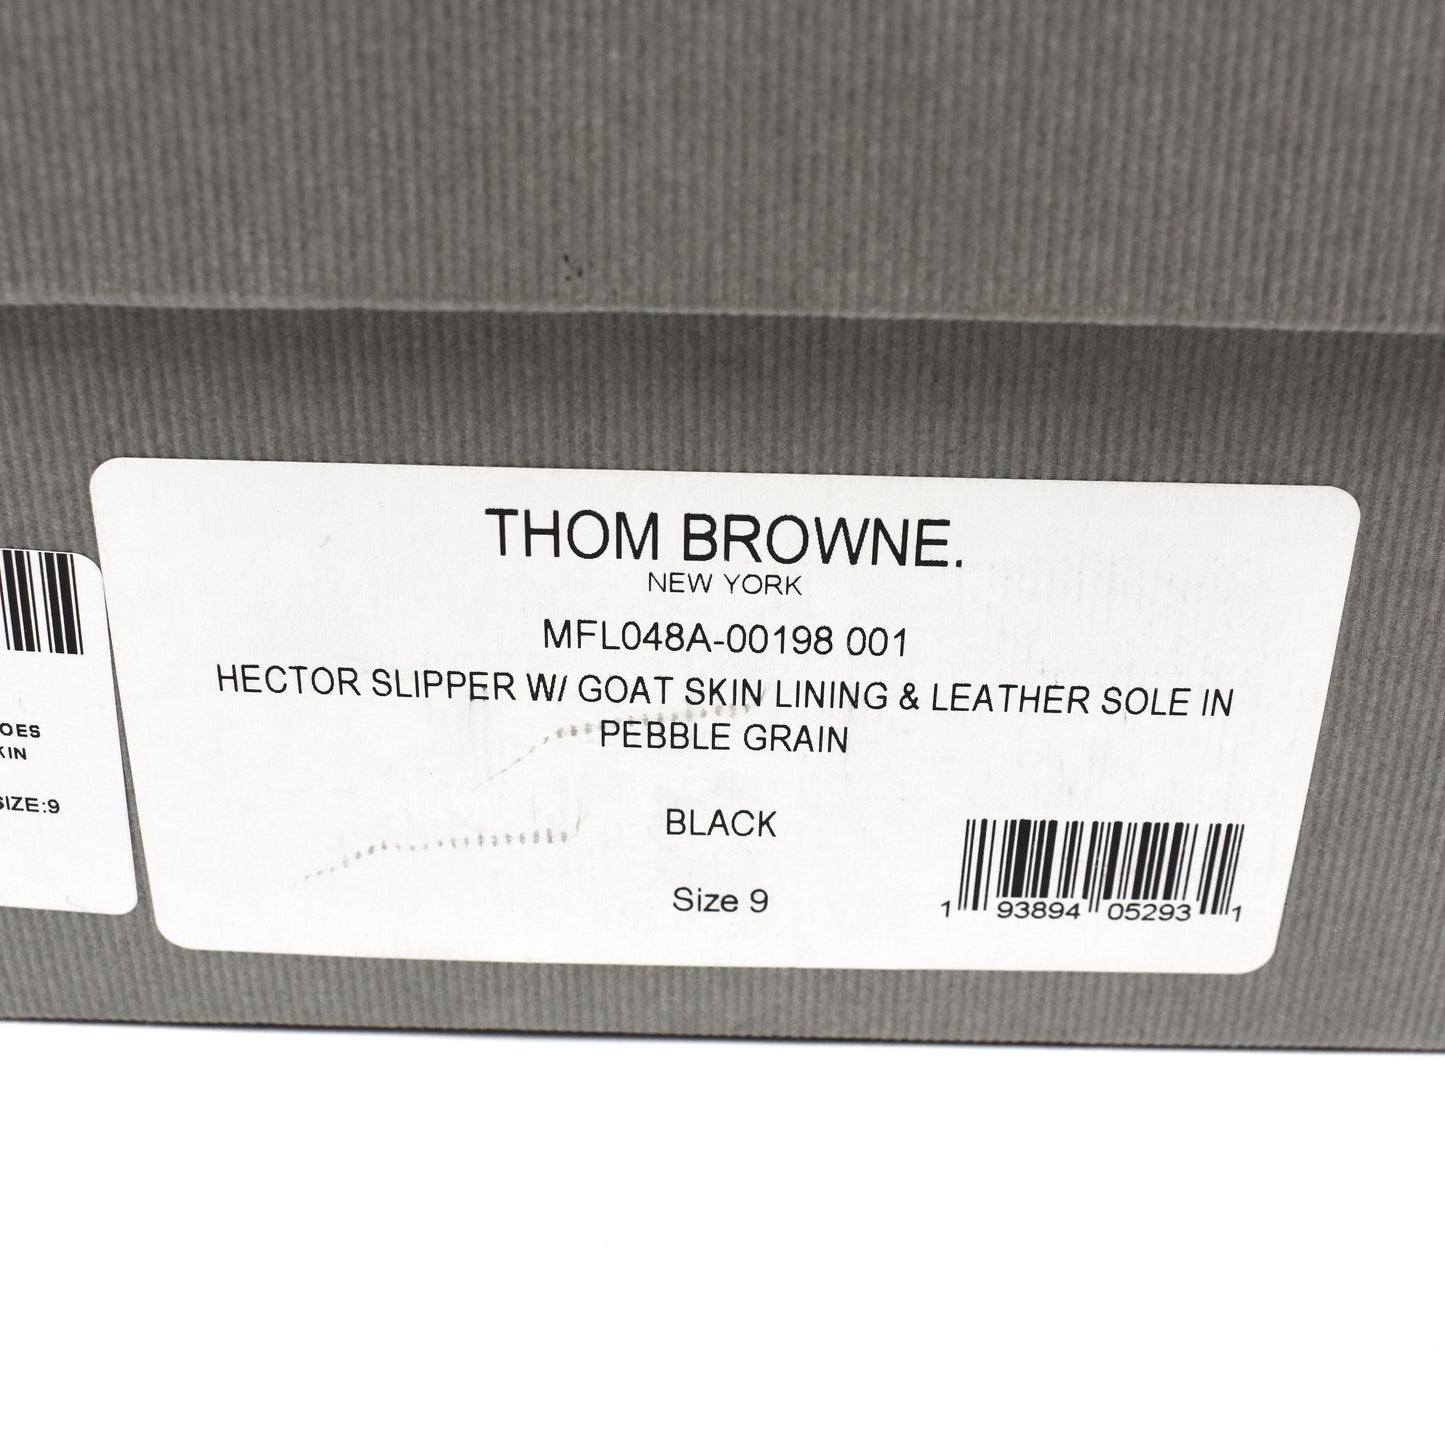 Thom Browne - Black Leather 'Hector' Dog Slippers